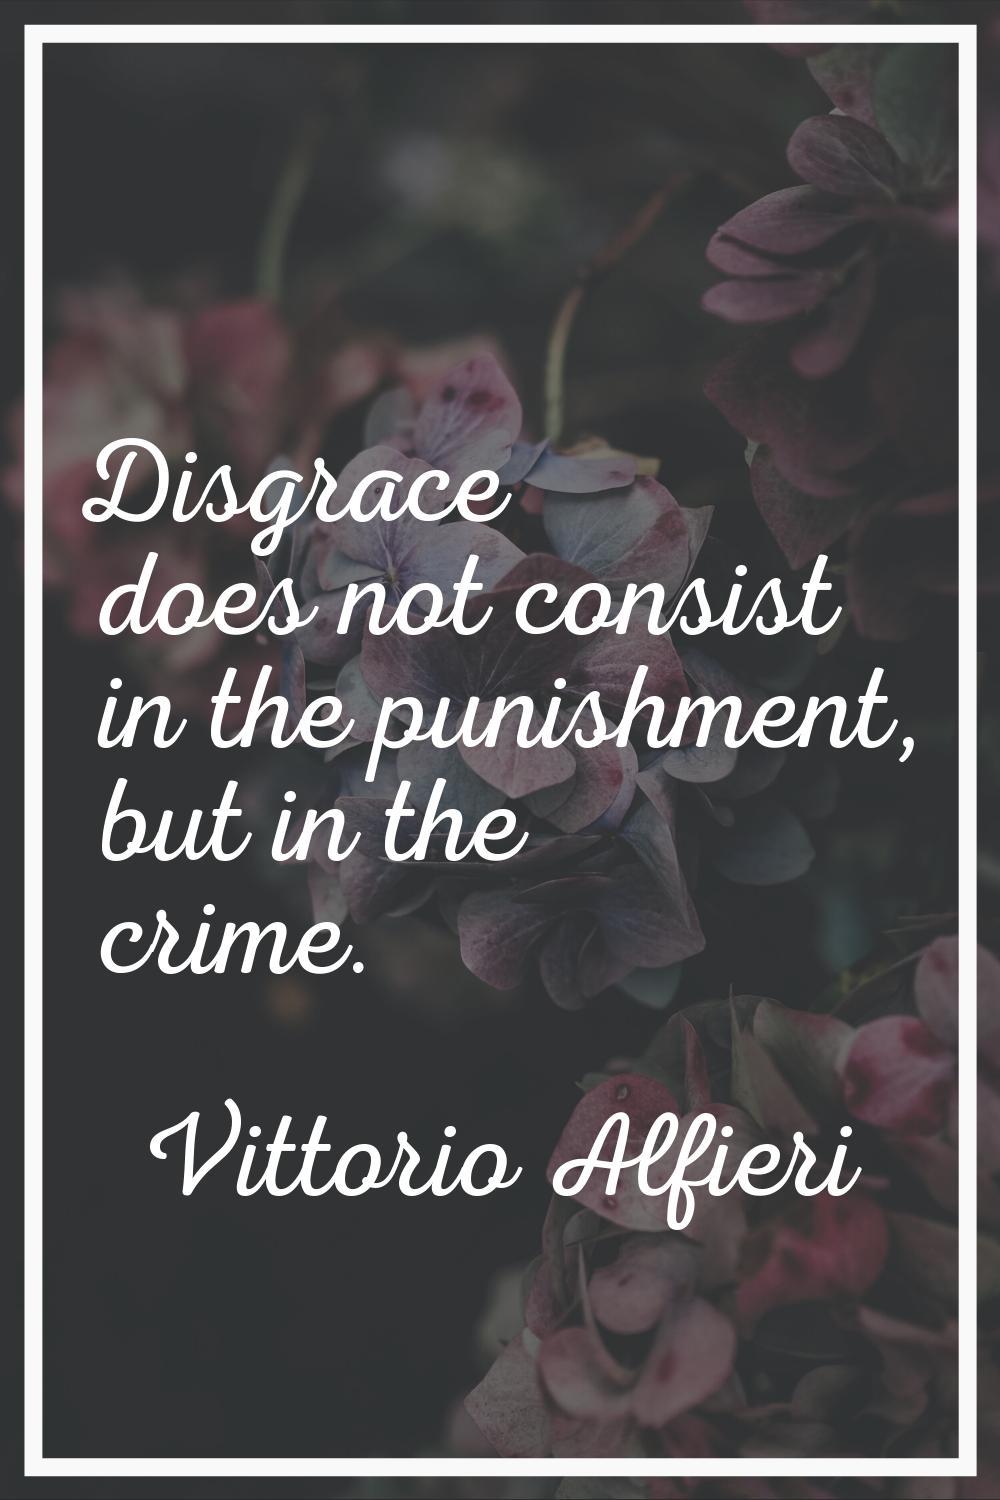 Disgrace does not consist in the punishment, but in the crime.